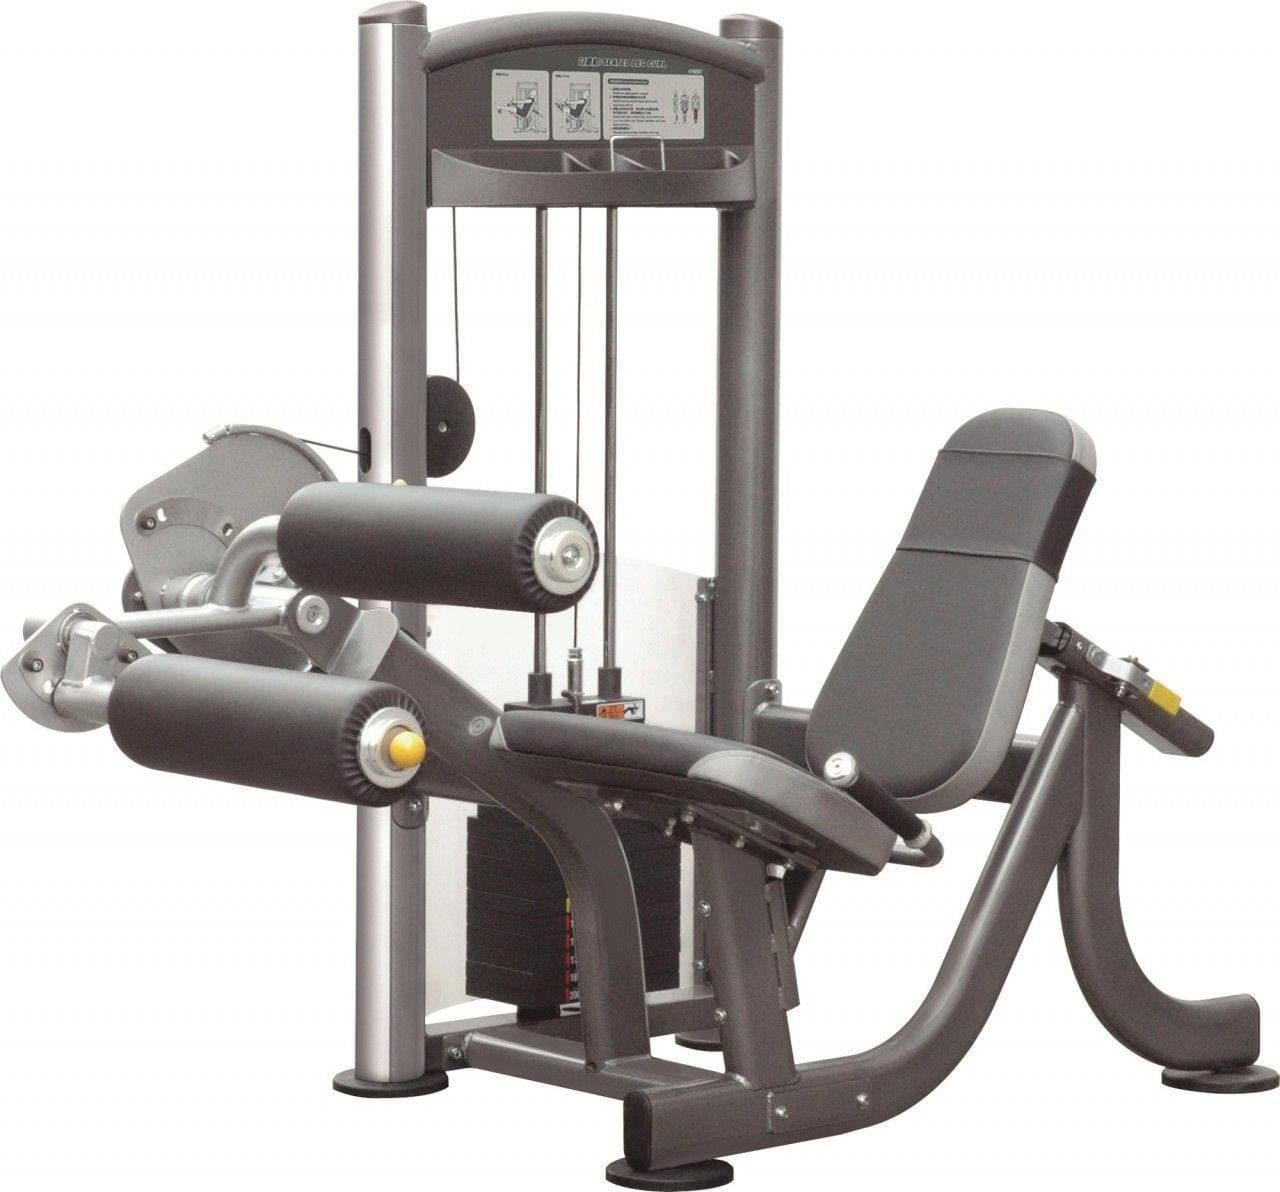 Impulse IT9307 Full-Commercial Seated Leg Curl, 91kg stack (200lbs) - Musclemania Fitness MegaStore